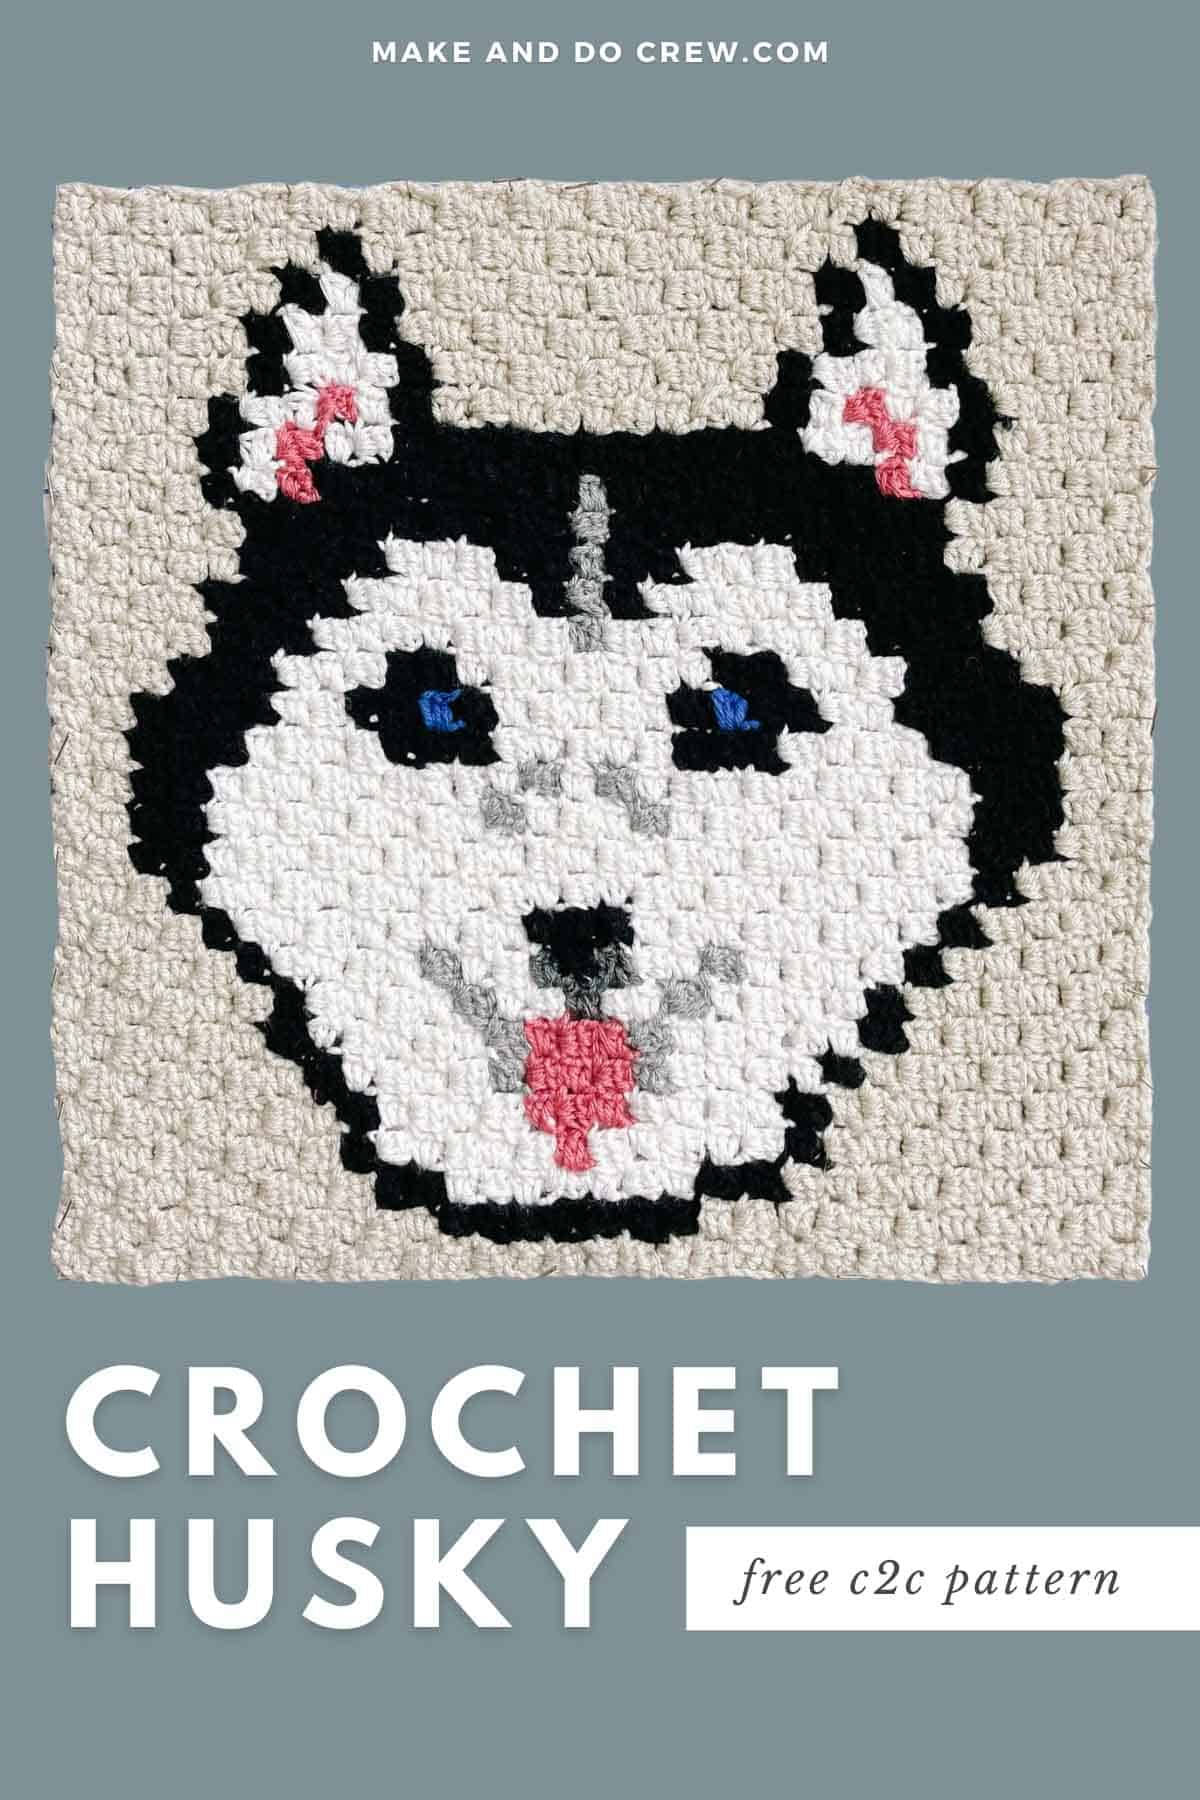 This image shows a free crochet pattern for a corner to corner crochet blanket square featuring a black and white husky dog on a gray-green background.